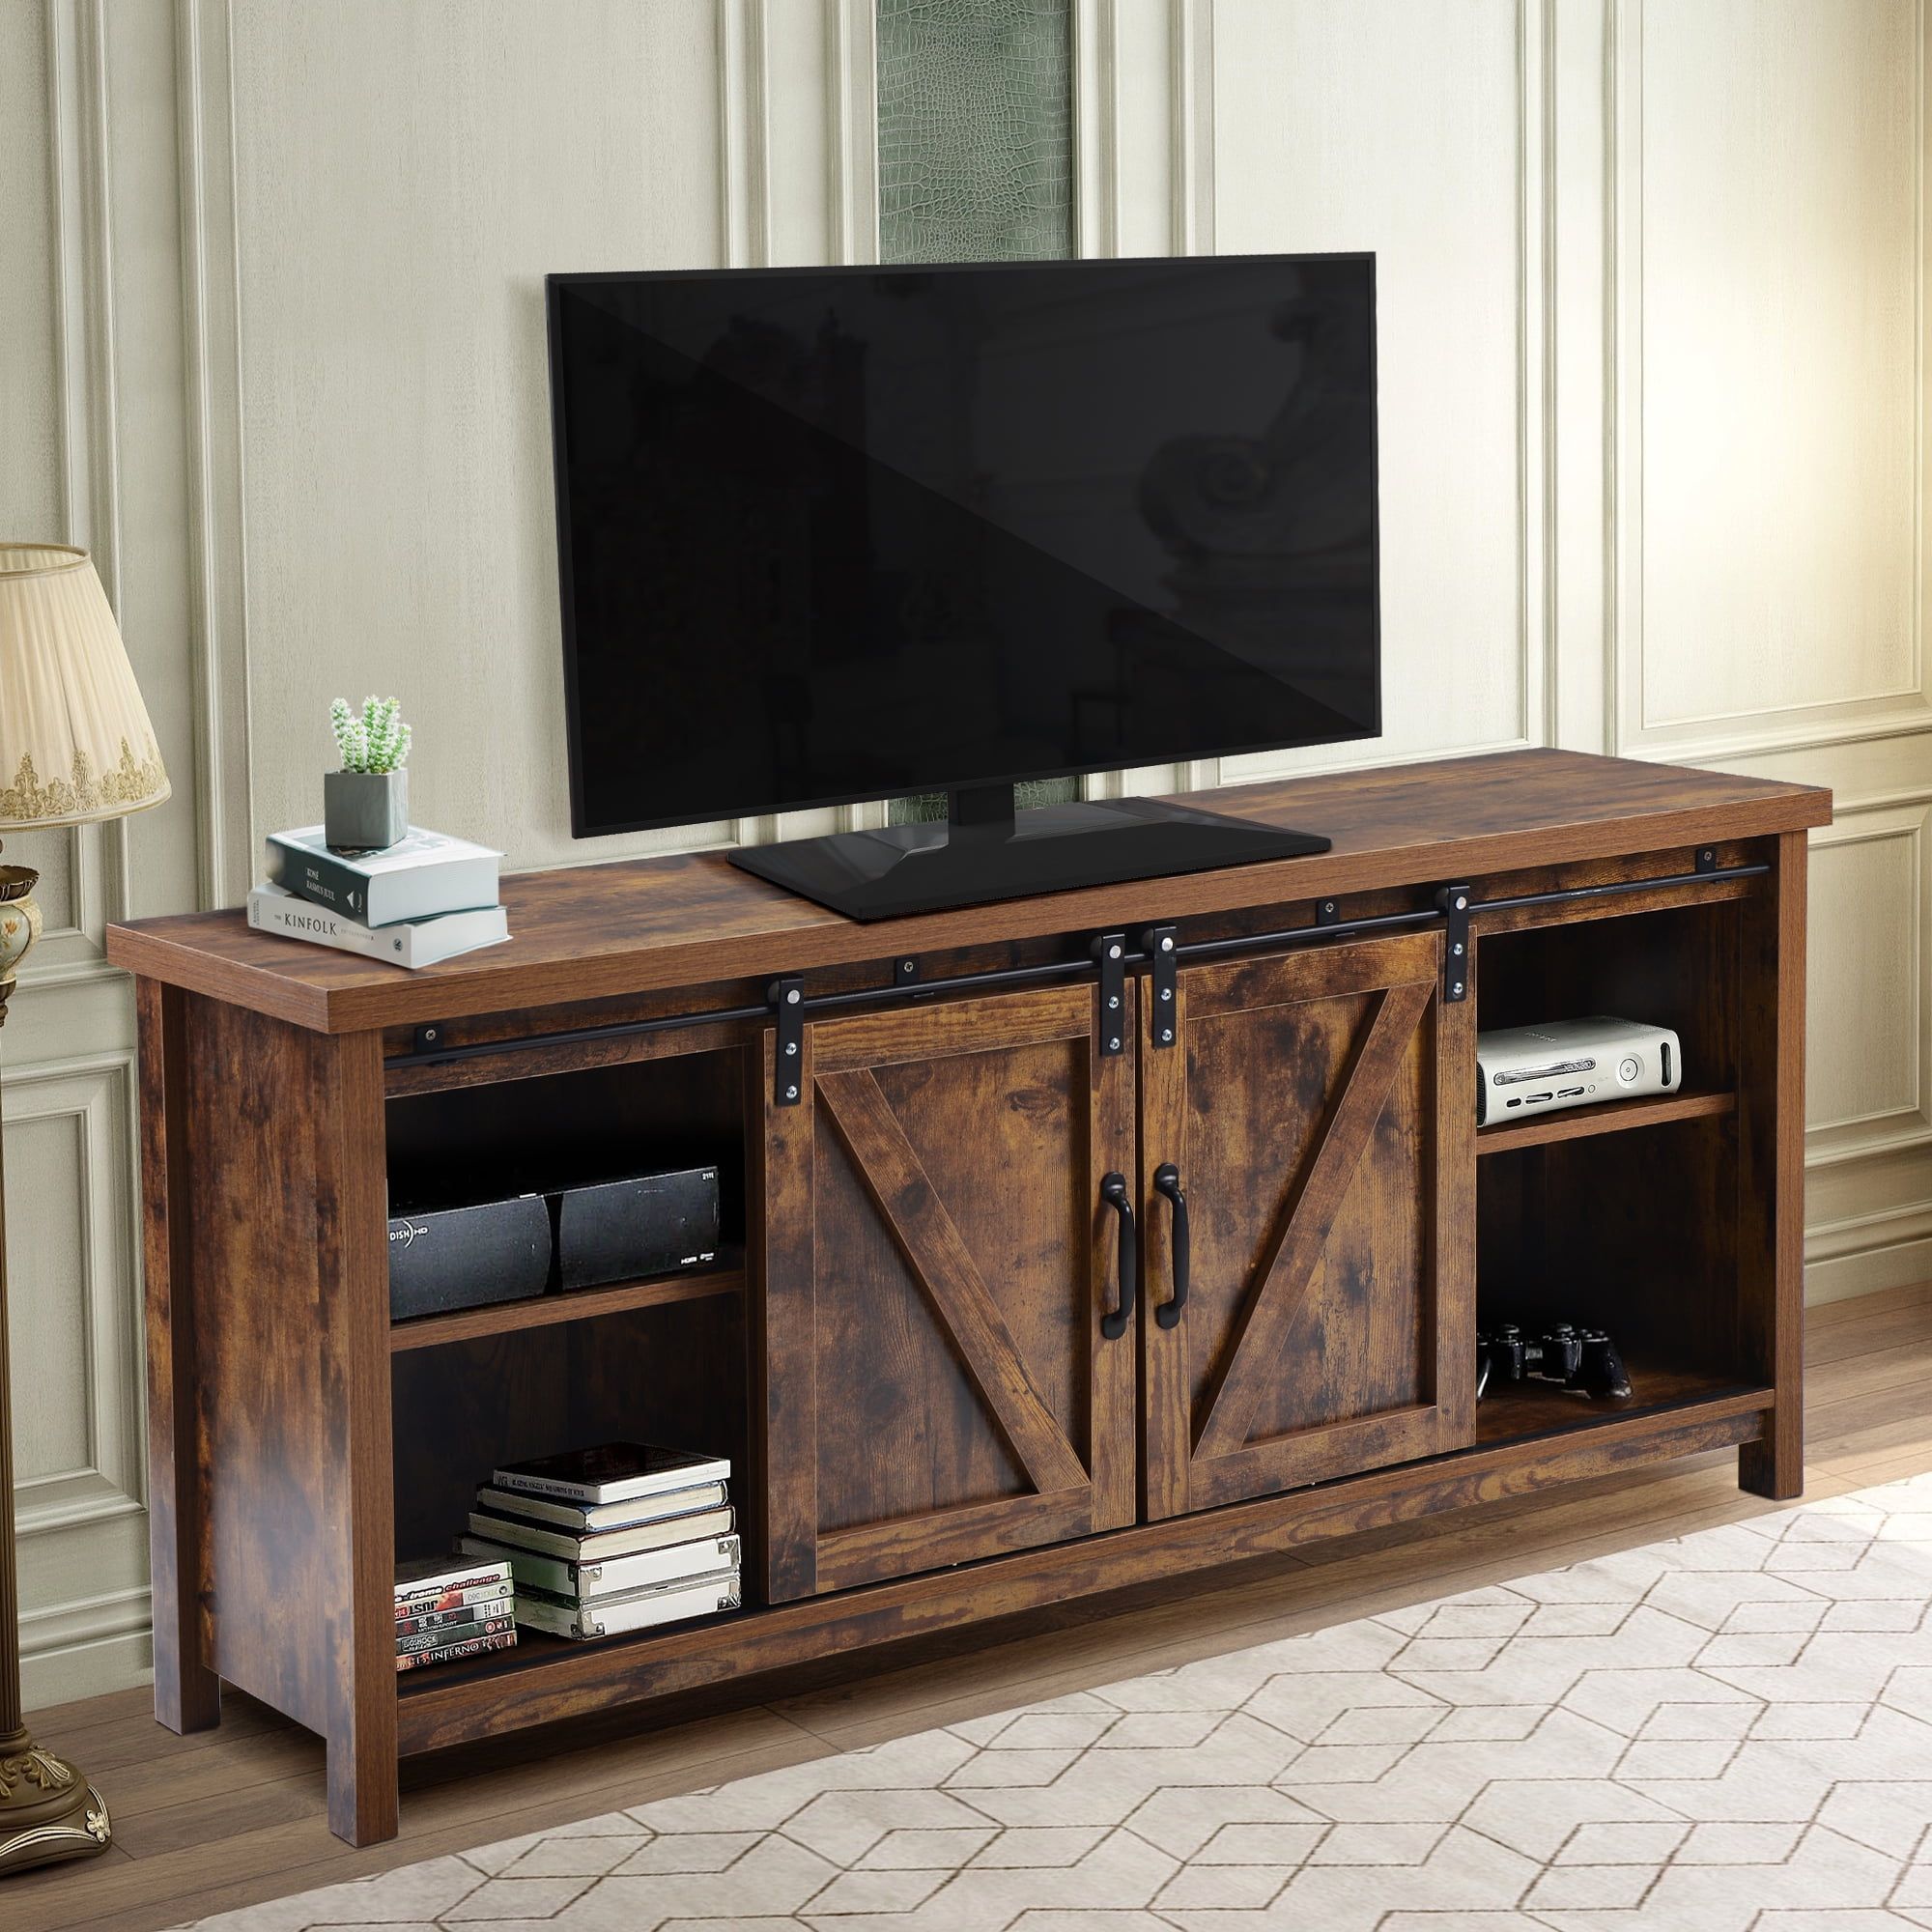 Farmhouse Universal Tv Stand For Tv's Up To 60" Flat Screen, Tv Cabinet With Regard To Farmhouse Stands With Shelves (View 11 of 20)